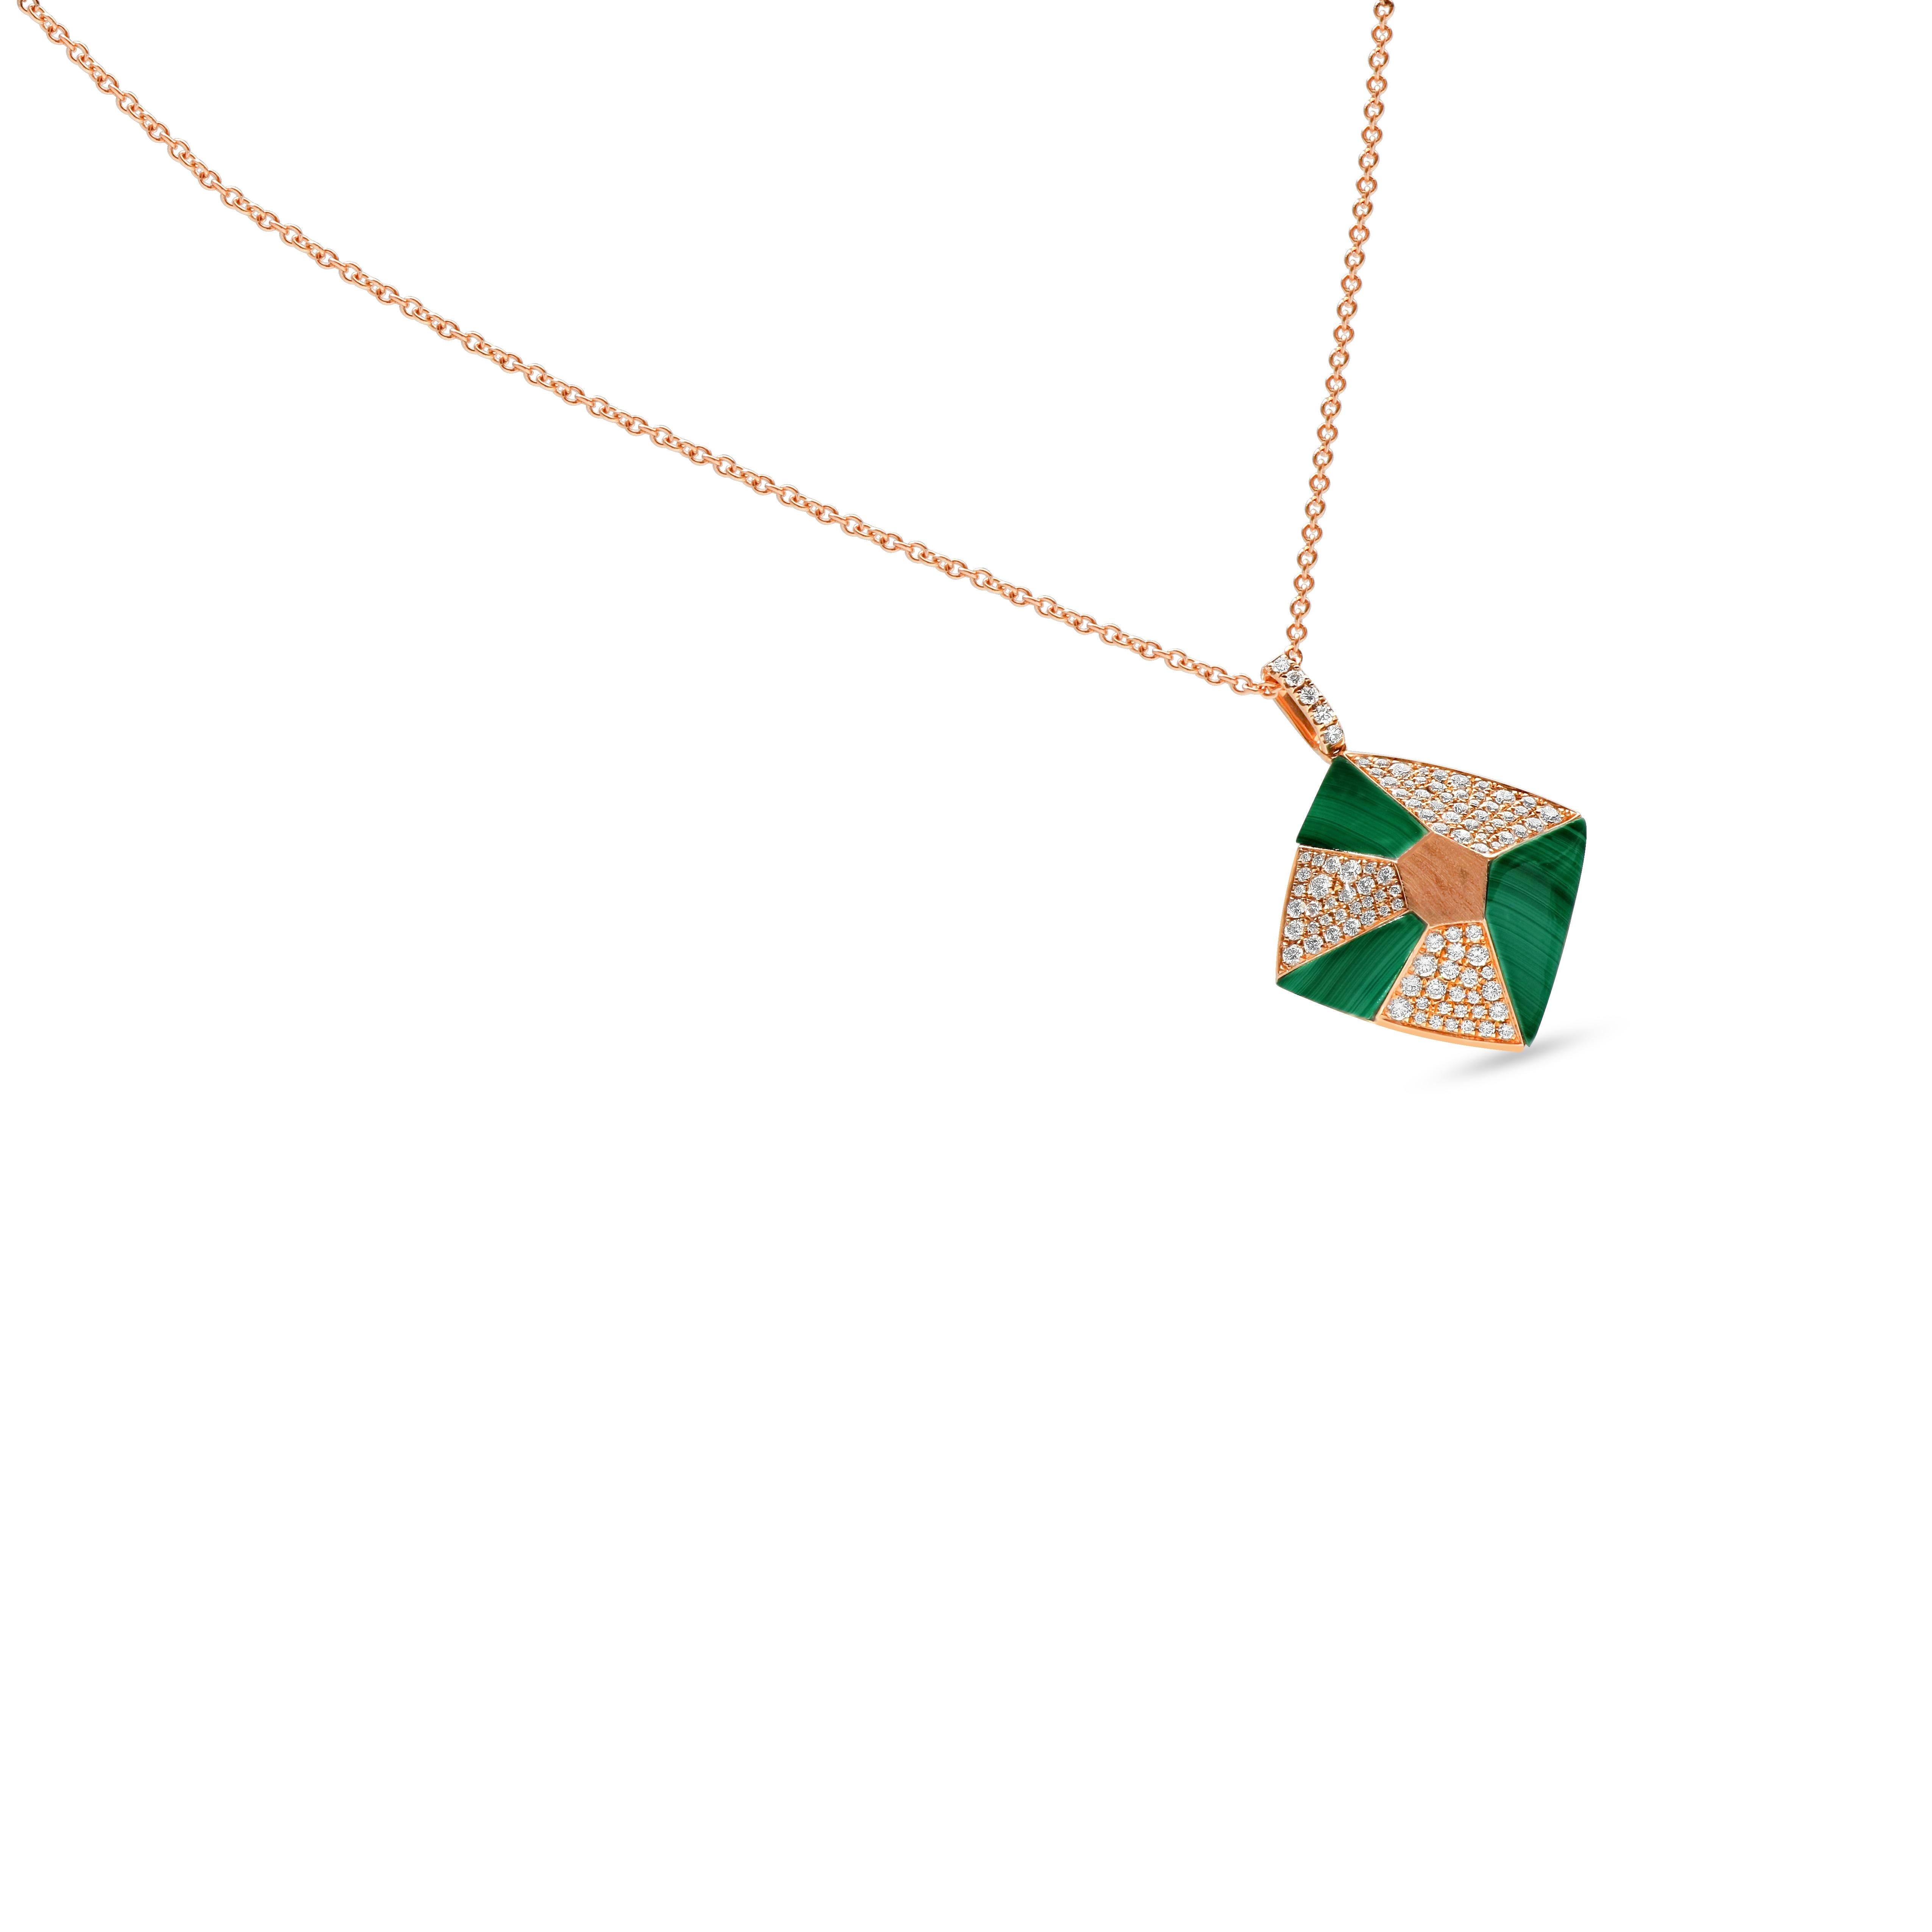 A stunning necklace is sculpted using 18k rose gold and designed with diamonds and malachite motifs.

-	Weight: 10.022 g 
-	Diamond: 1.000 cts
-	Others: 4.760
-	Color & clarity: G.H / SI
